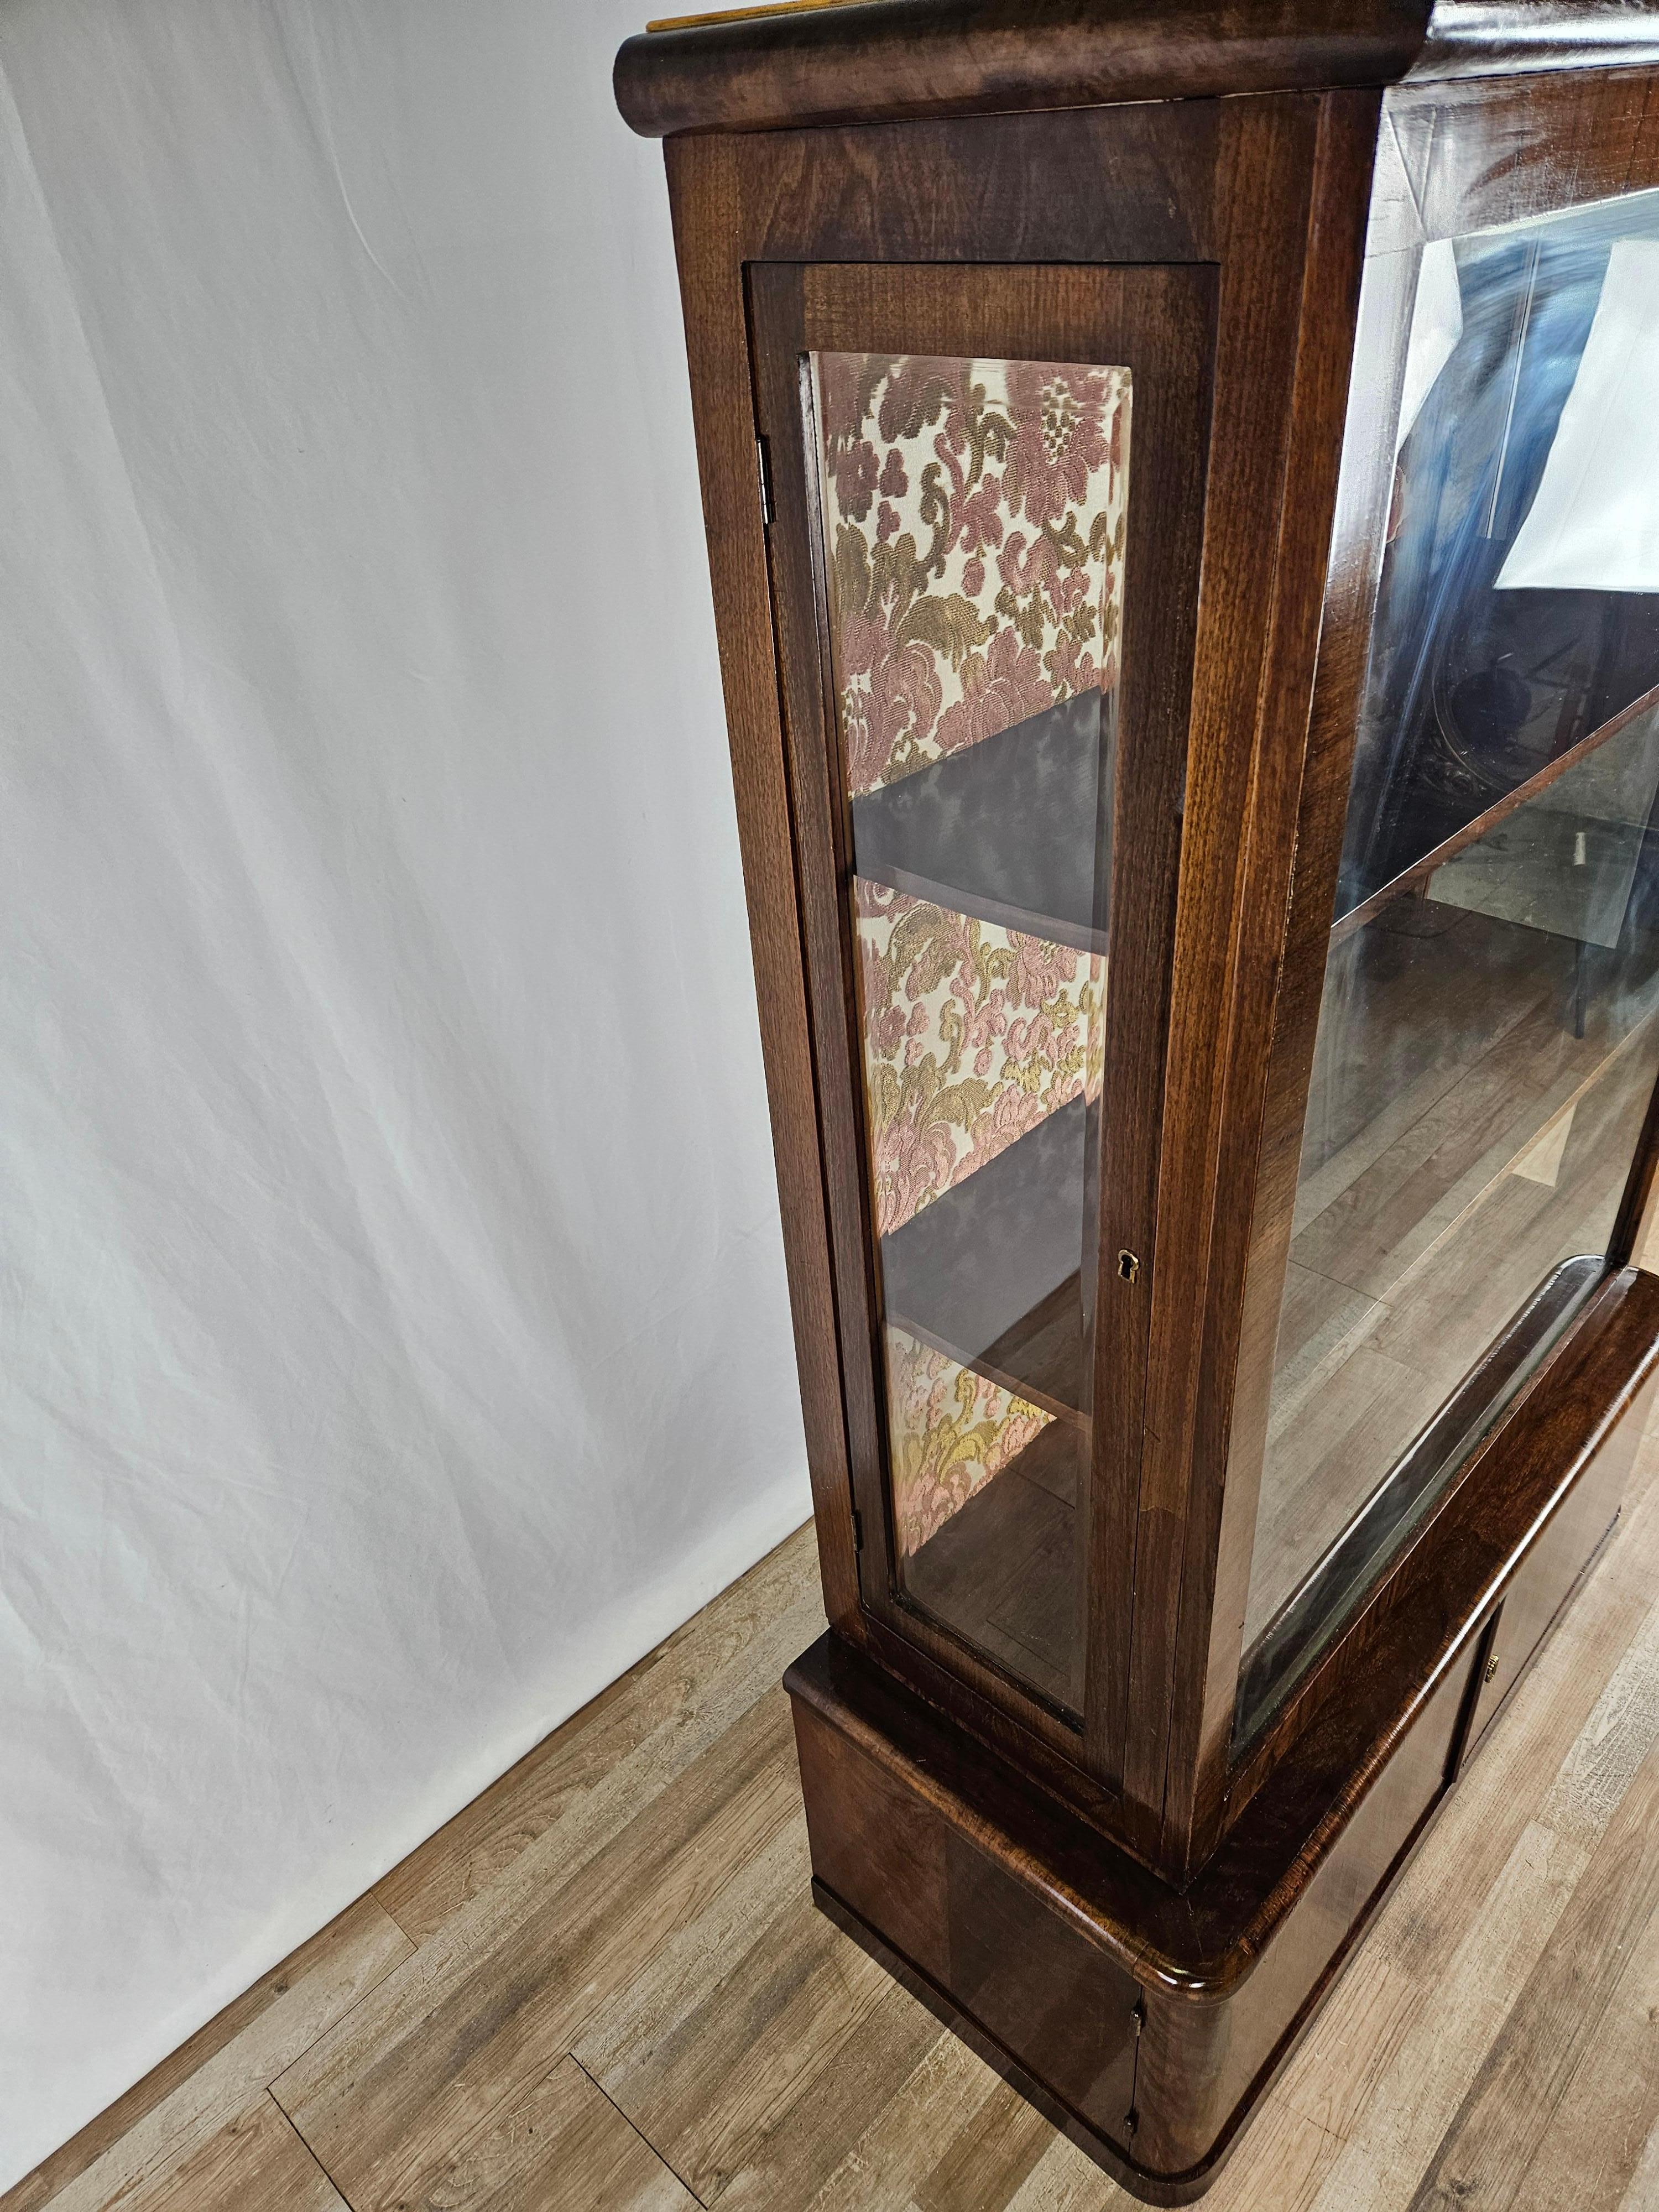 Art Deco display case in walnut burl from the early 1940s circa, double-body cabinet.

It has two side doors for opening the display case equipped with internal shelves and lined with a special fabric, and there is also a large and roomy compartment